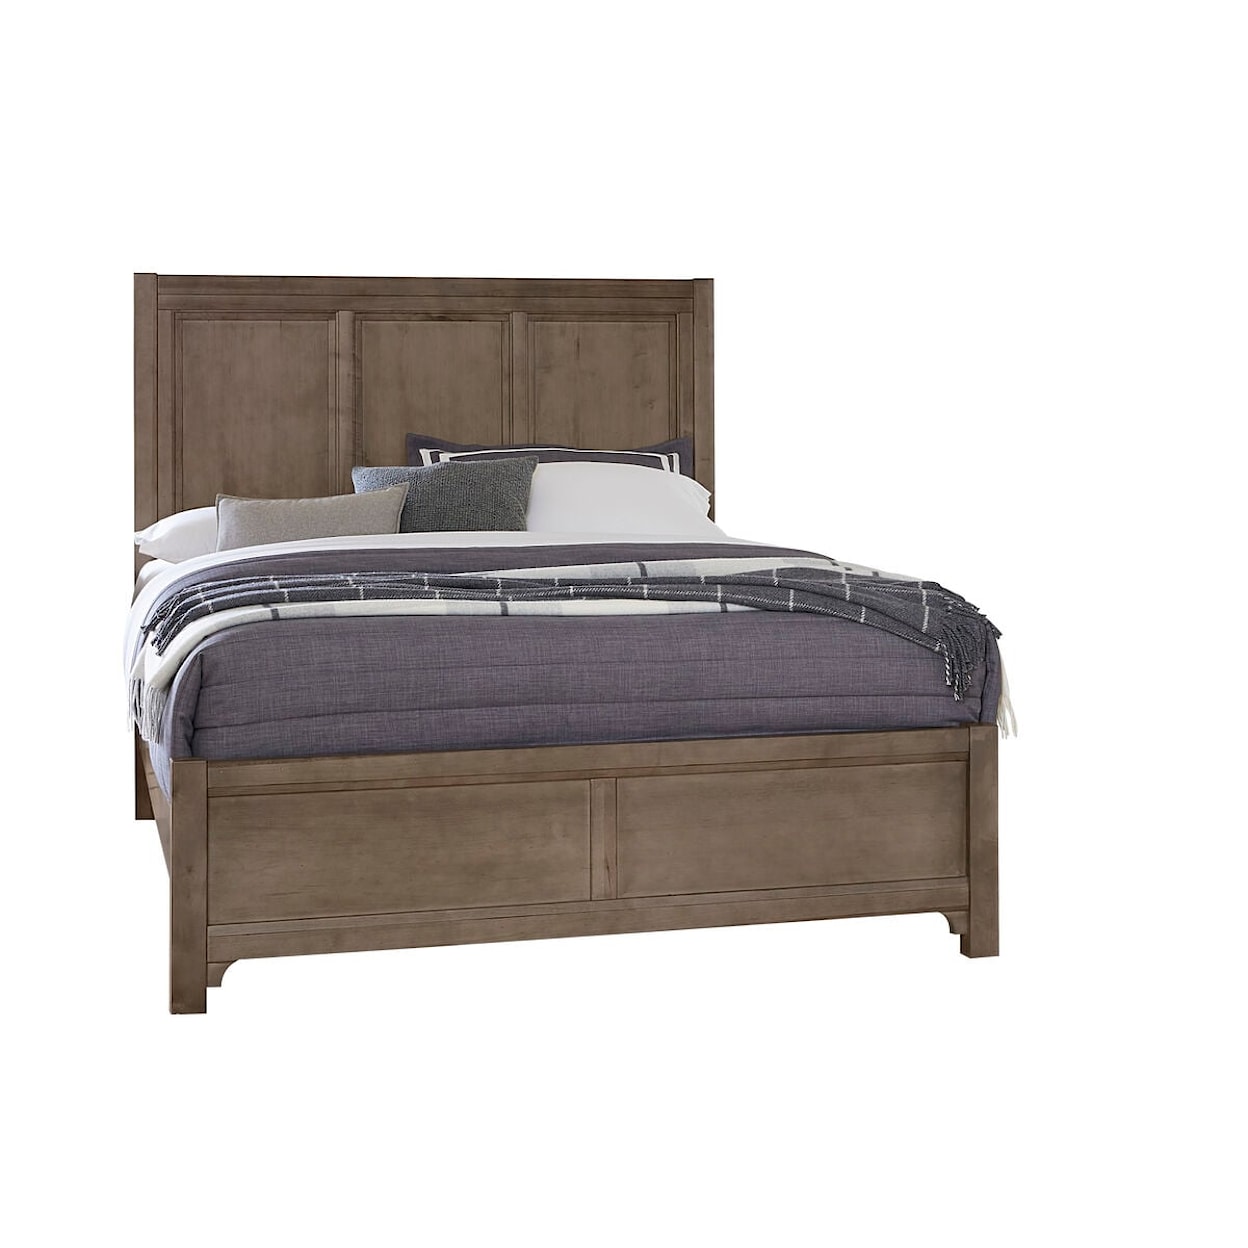 Vaughan Bassett Cool Farmhouse King Panel Bed with Metal Slats